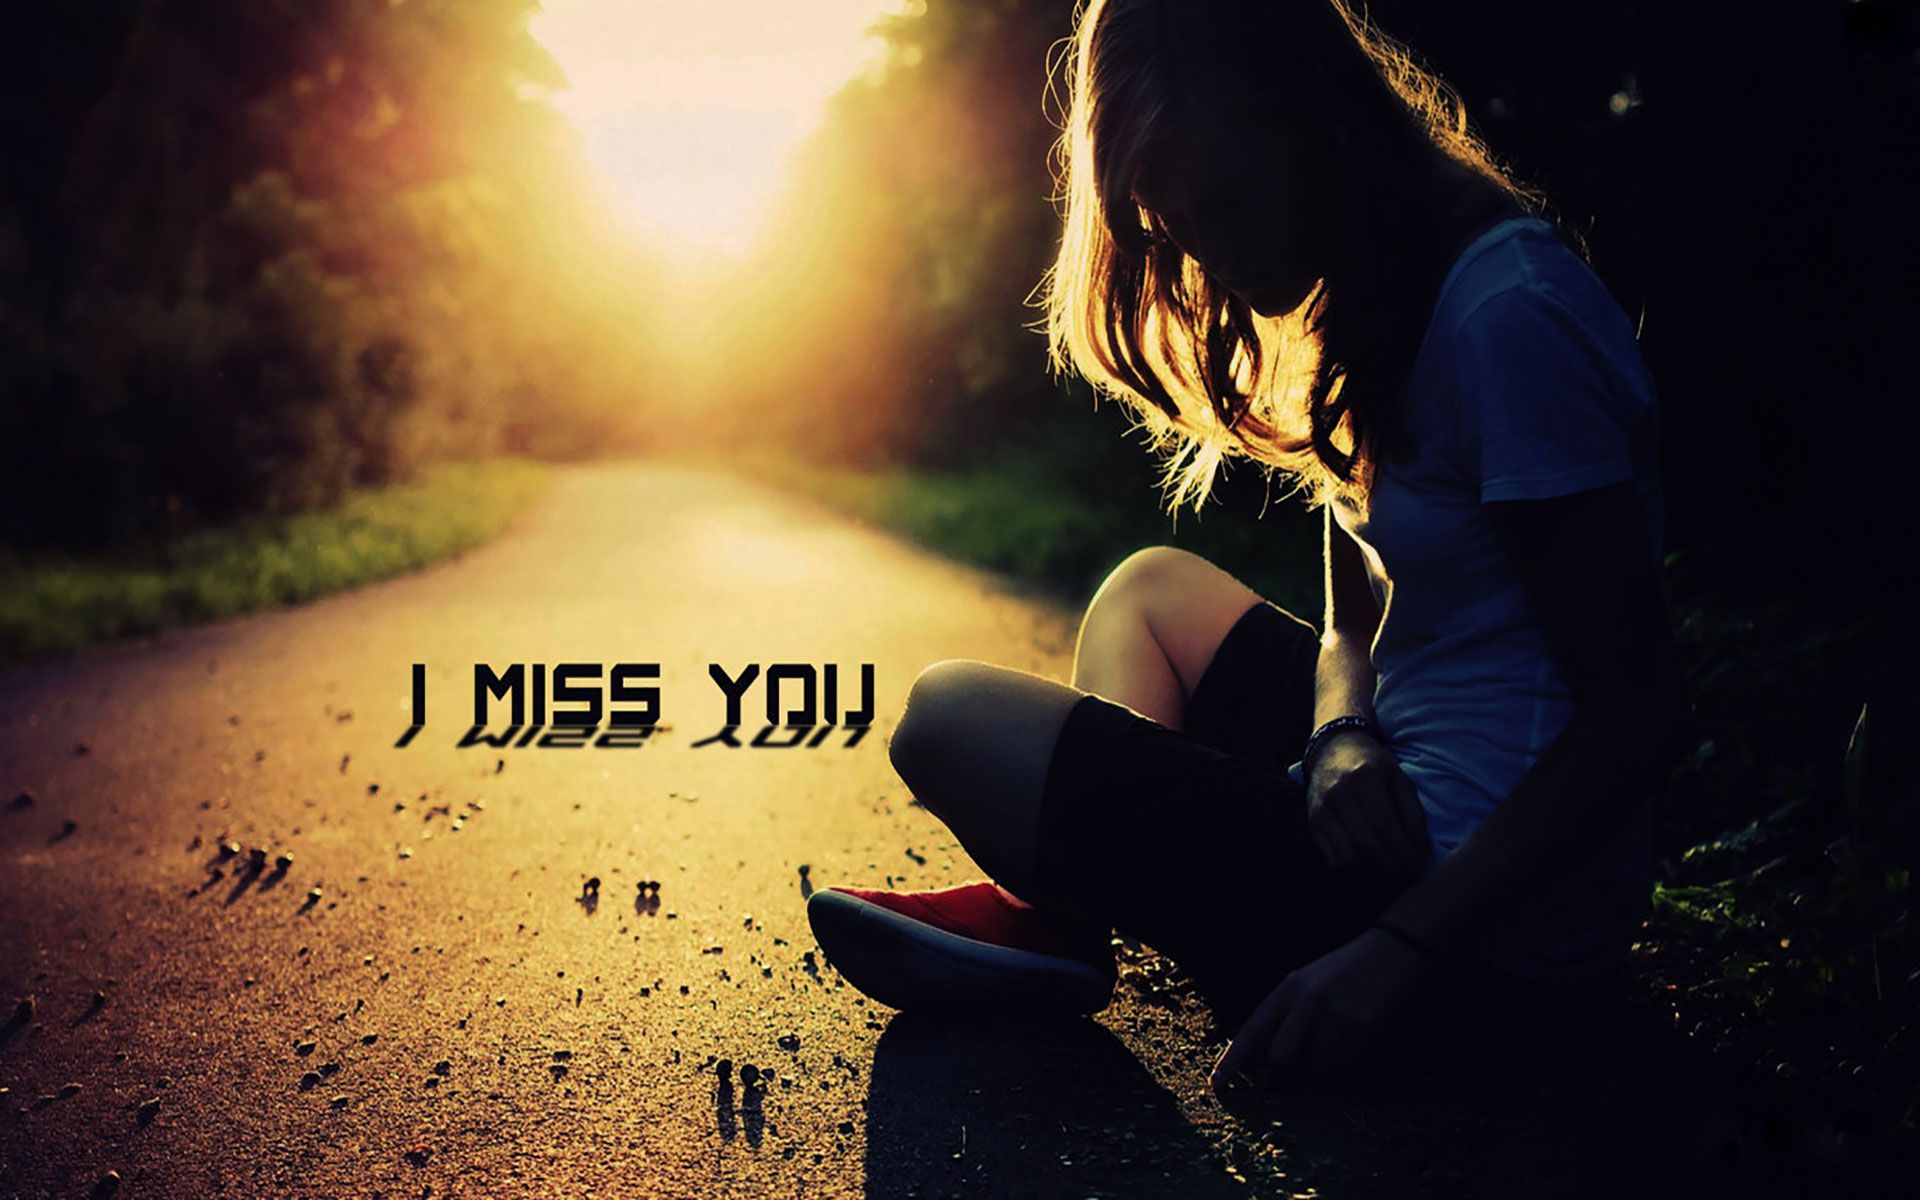 HD I Miss You Wallpaper for him or her Romantic Wallpapers Chobirdokan